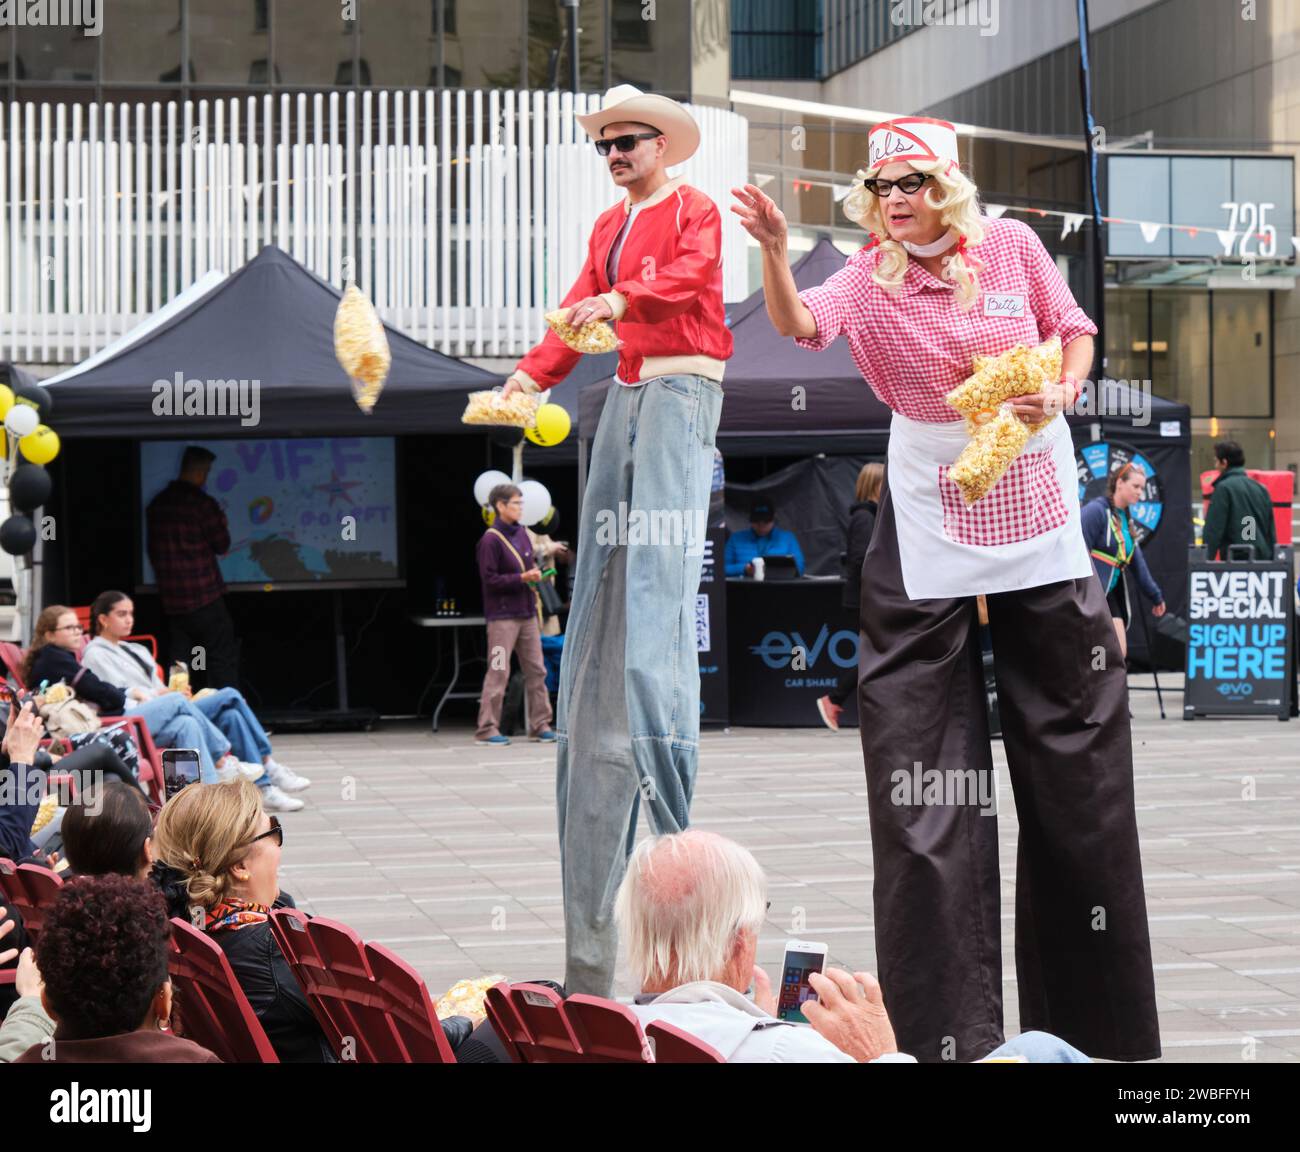 Performers on stilts throwing popcorn at attendance at outdoor film showing Stock Photo